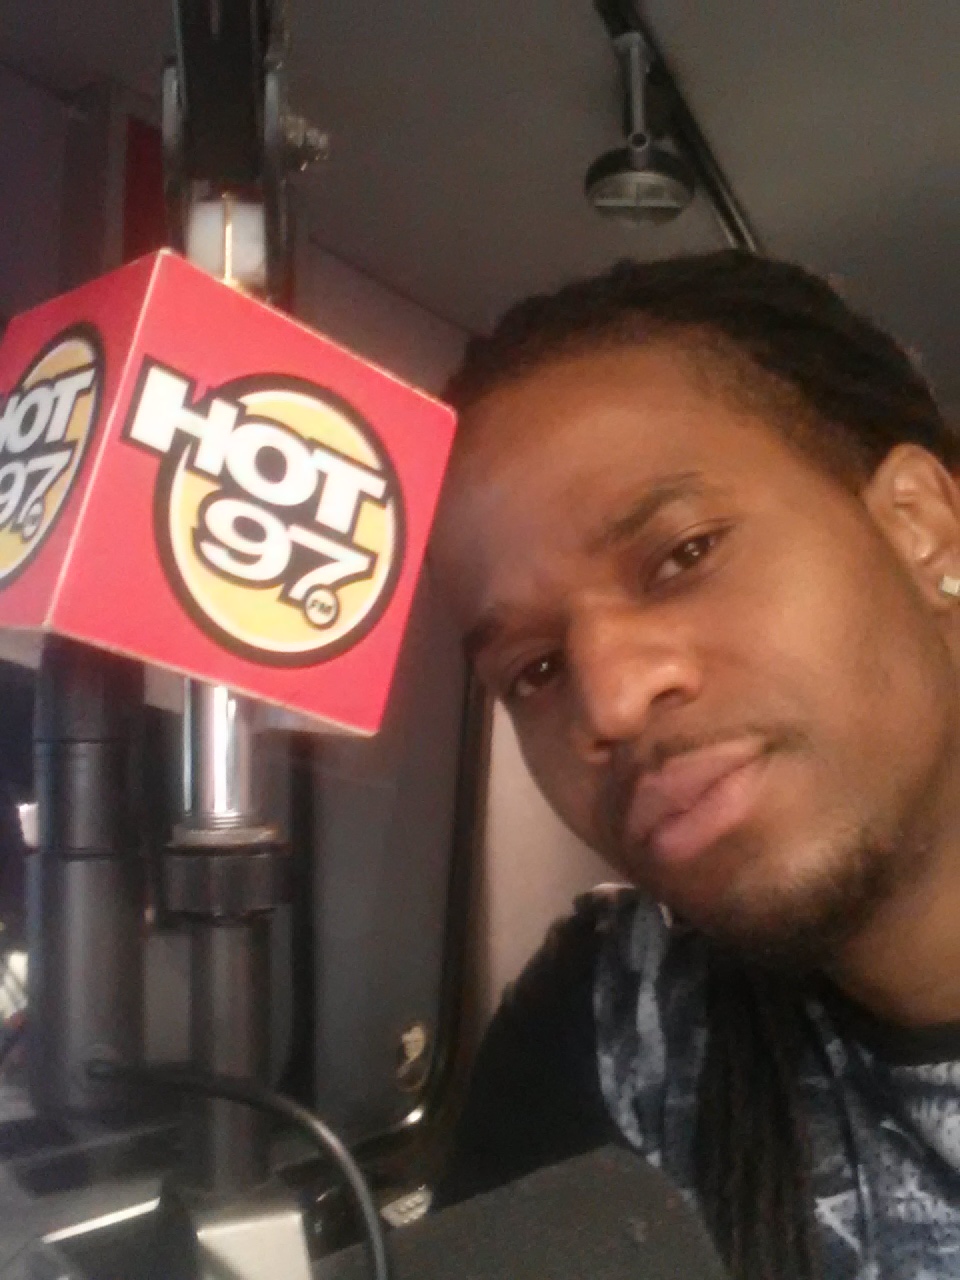 HOT 97 TAKING IT TO THE STREETS MAY 2014